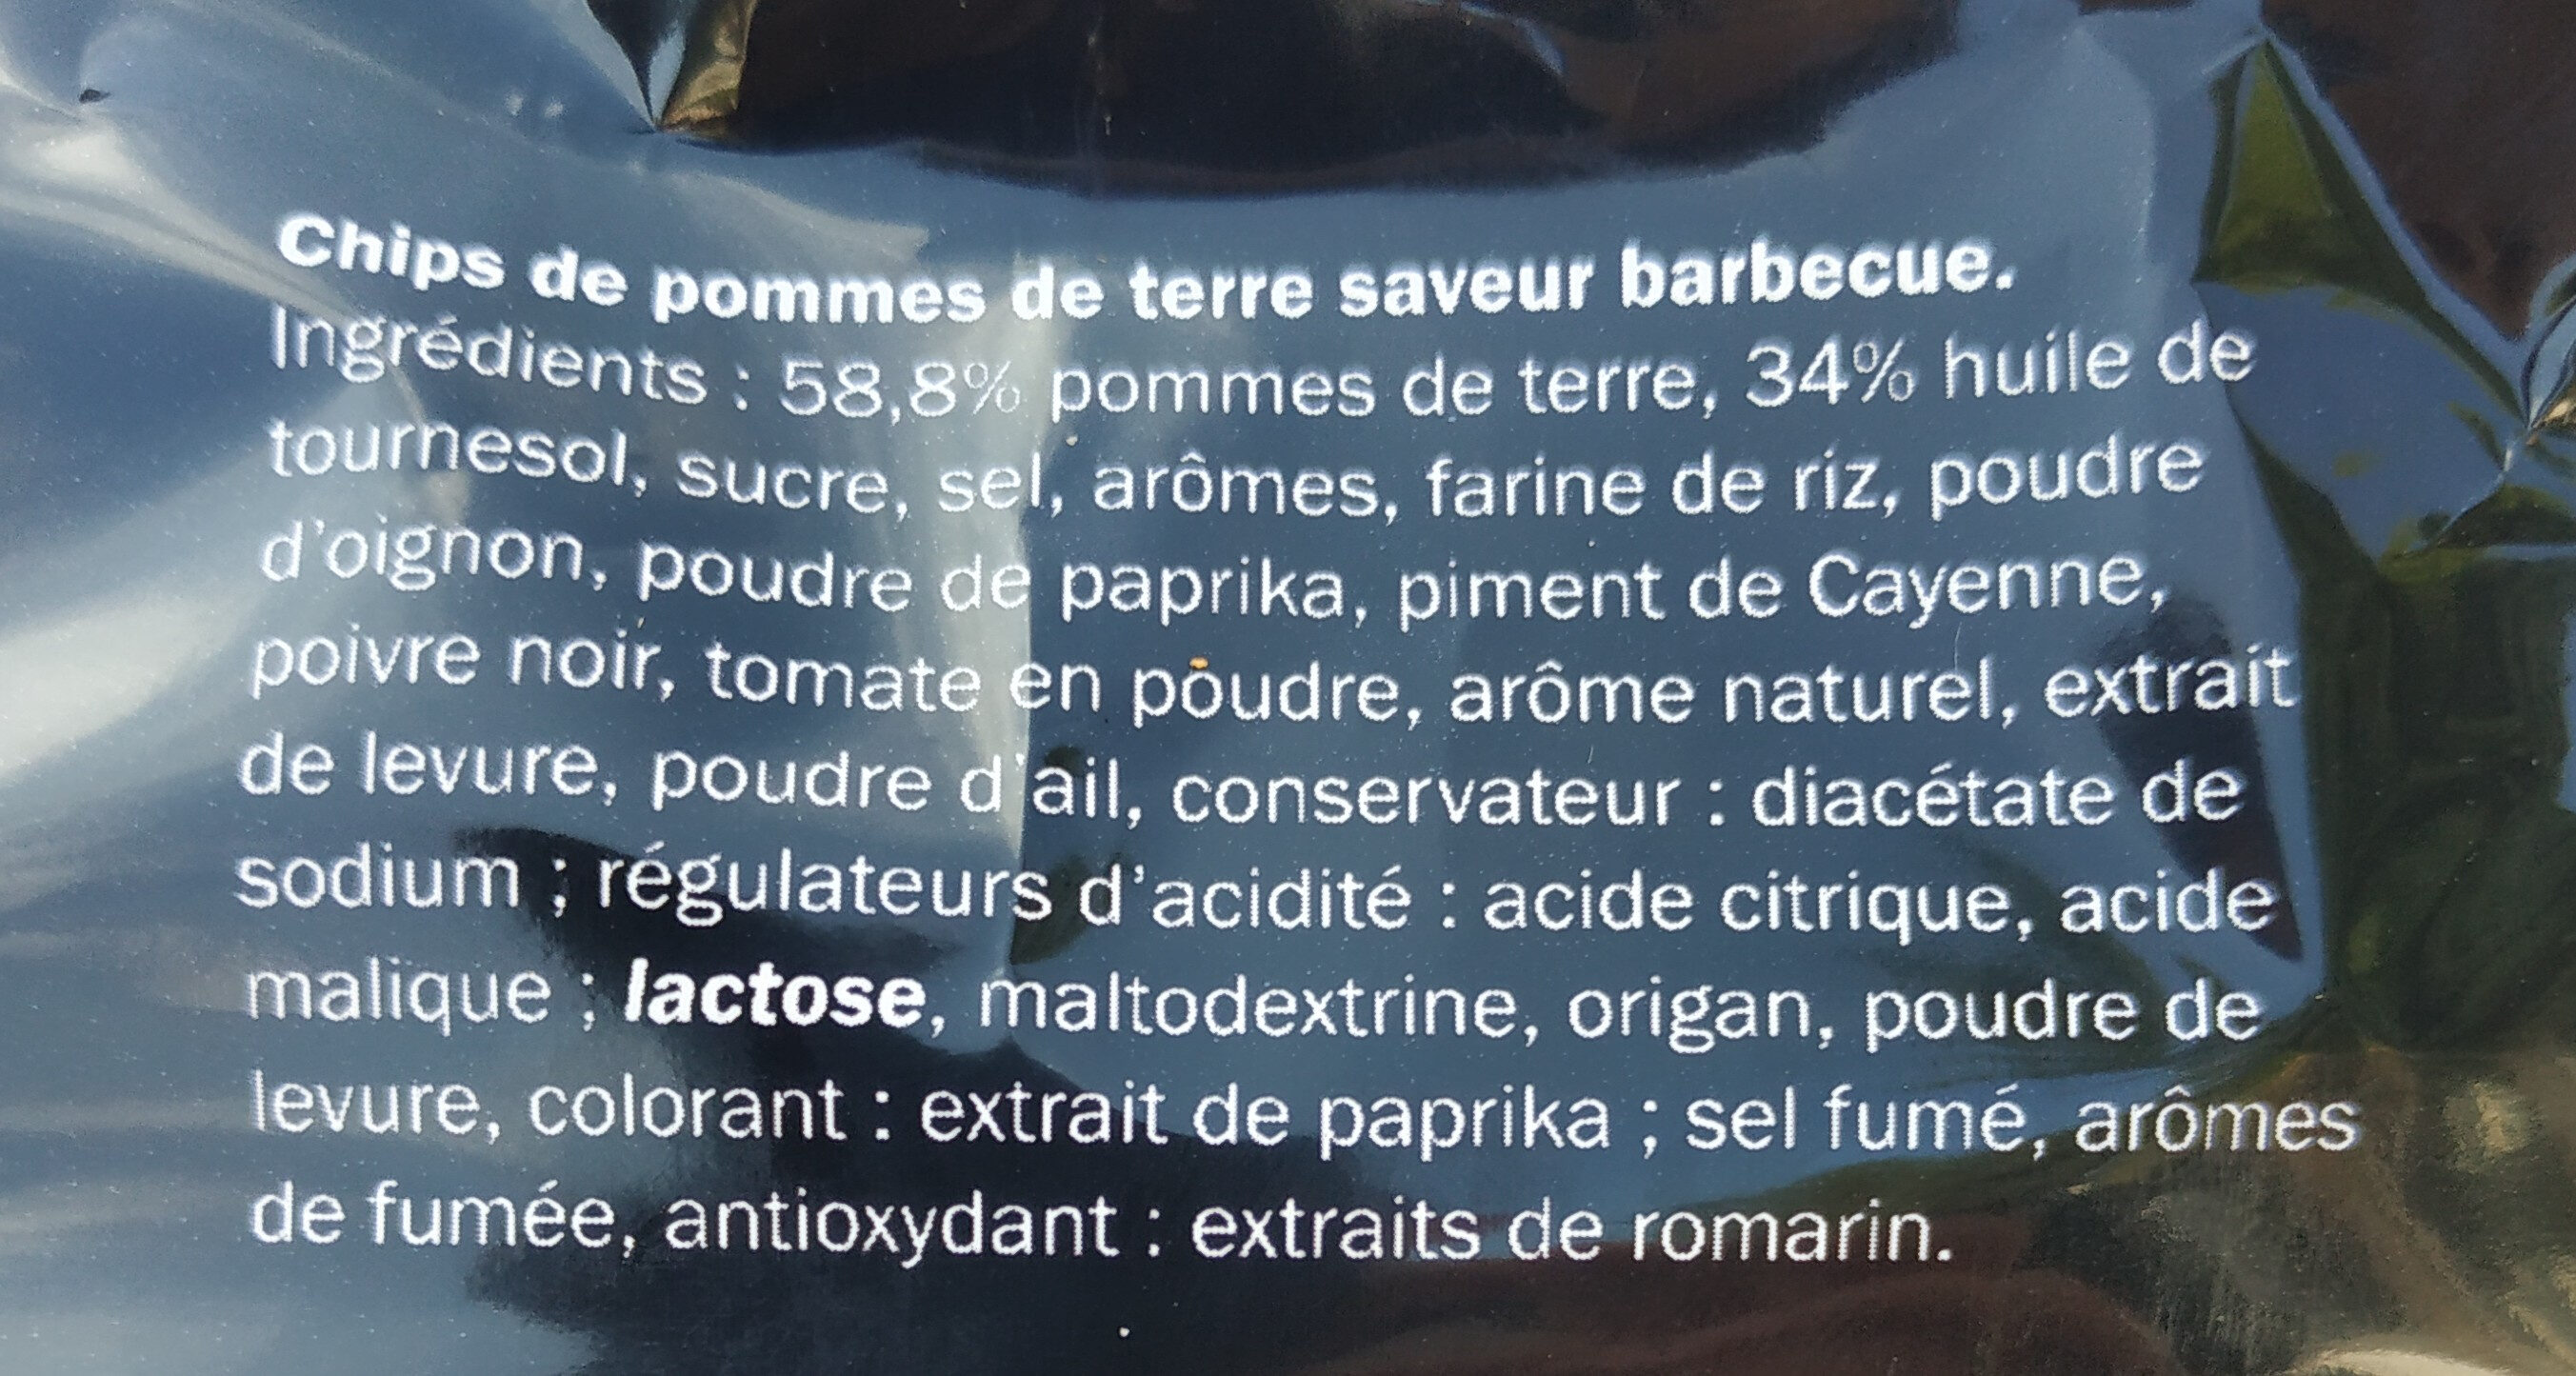 Chips Barbecue - Ingredients - fr